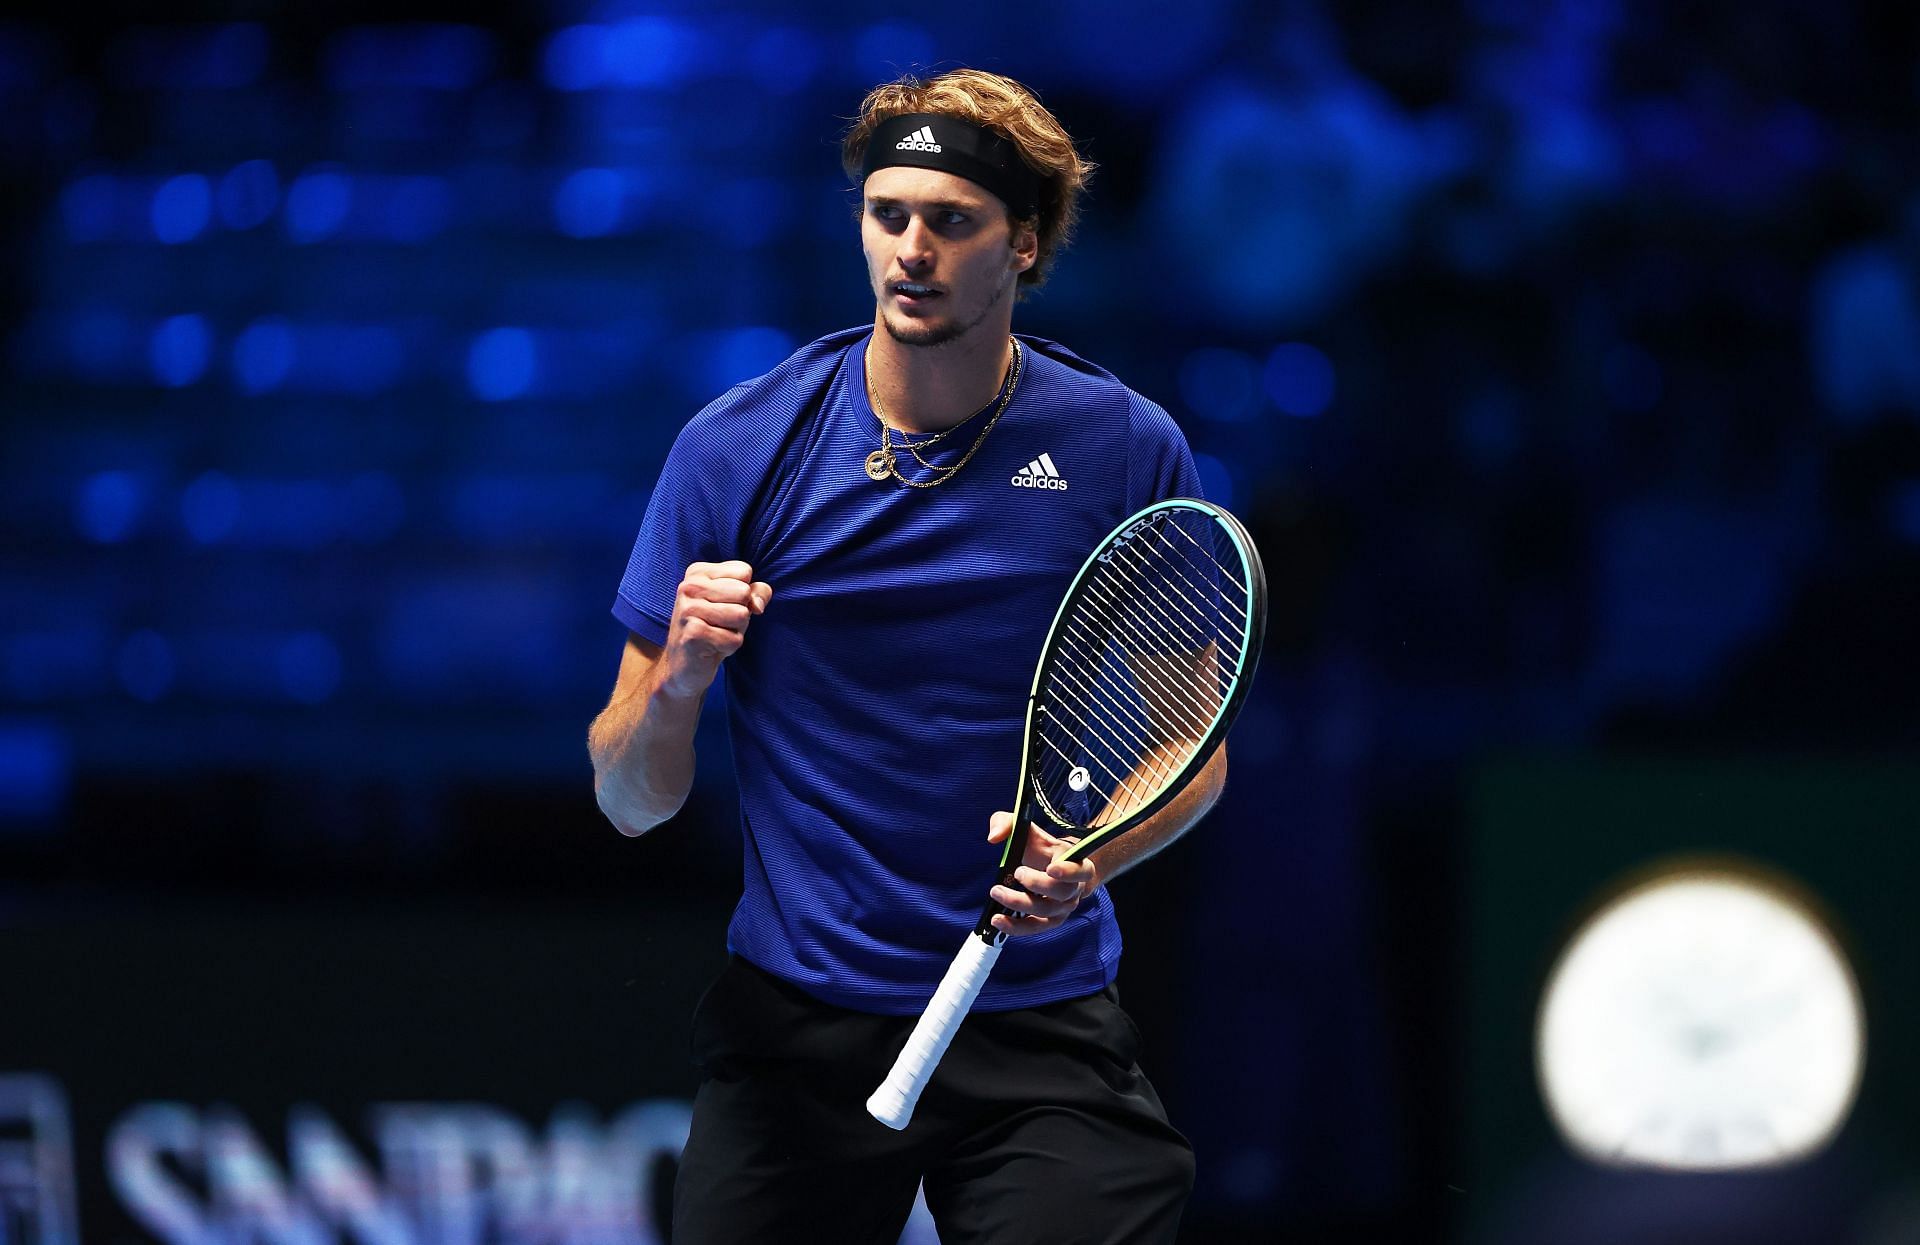 Alexander Zverev in action at the 2021 Nitto ATP World Tour Finals